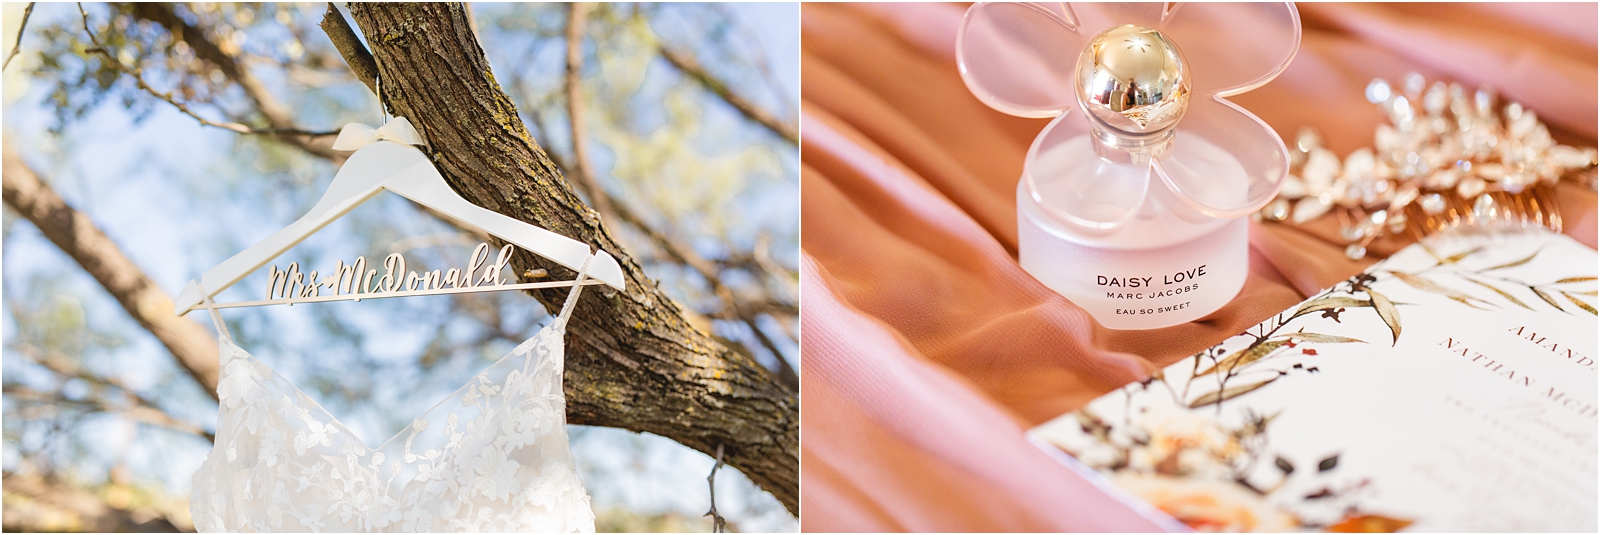 Wedding dress hanging on personalized wedding hanger in a tree for a Destination Wedding - TX. detail shot of perfume bottle